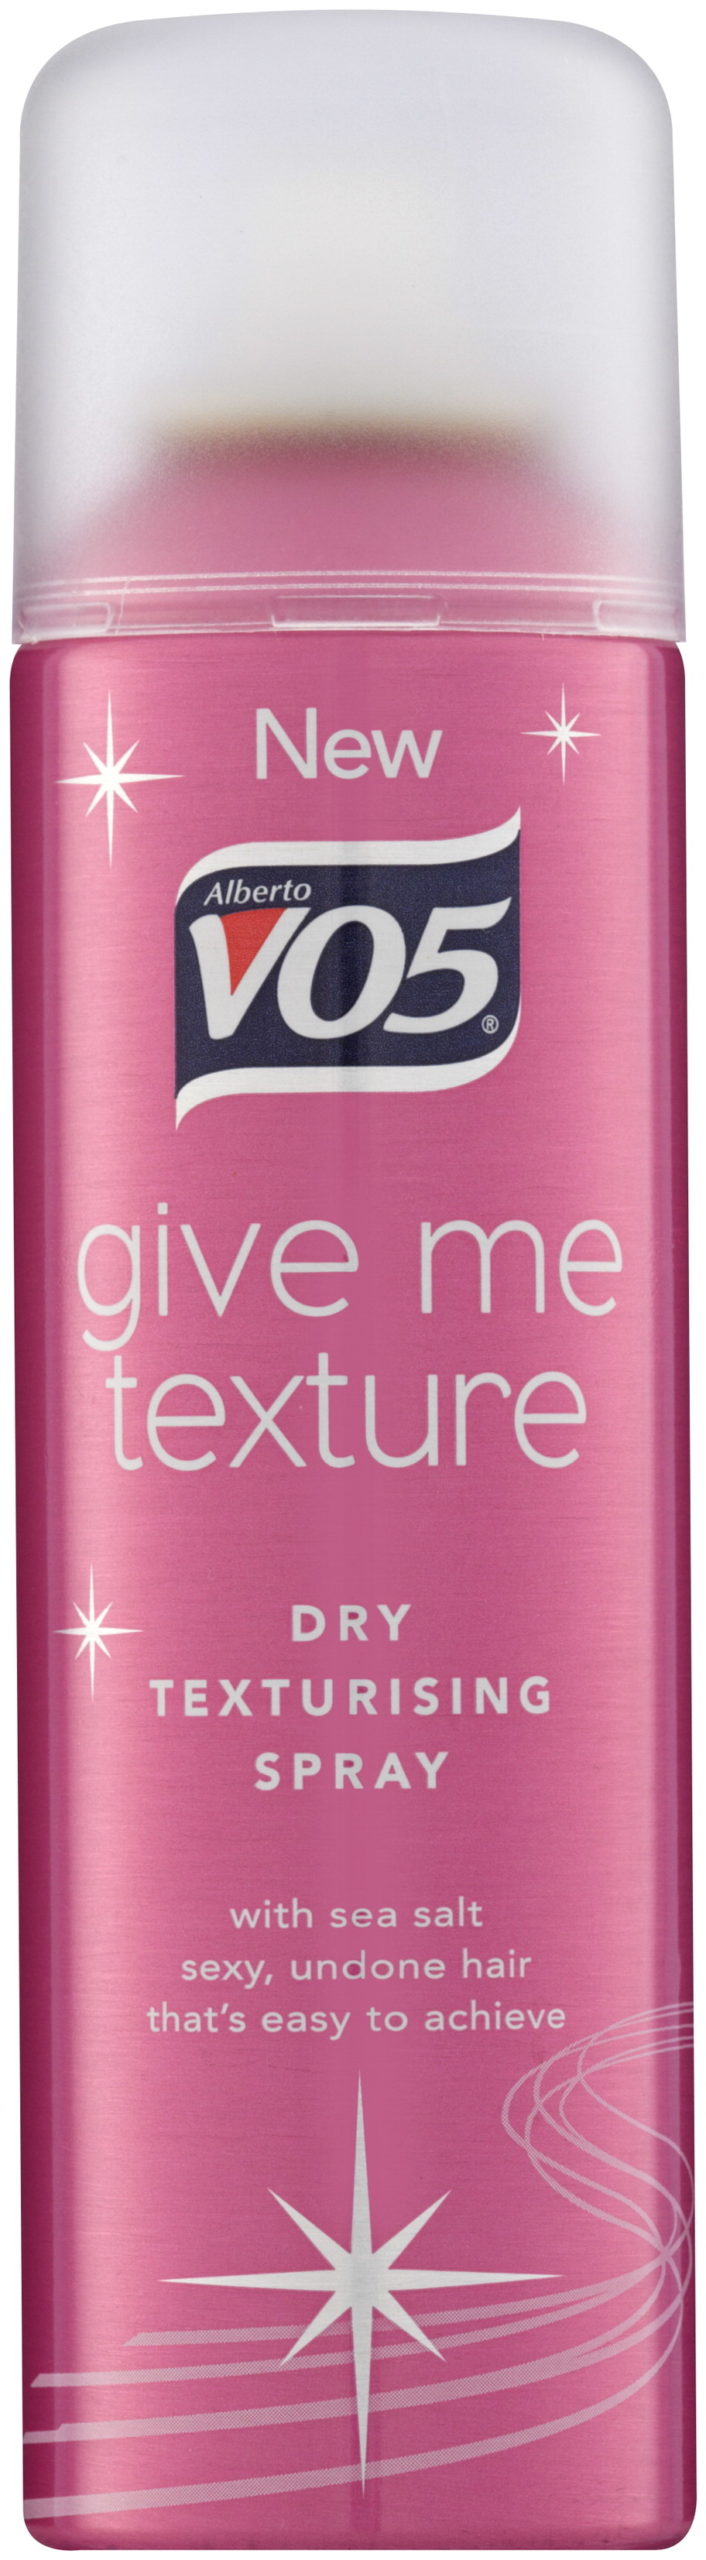 VO5 Give Me Texture Dry Texturising Spray 200ML, RRP $7.99